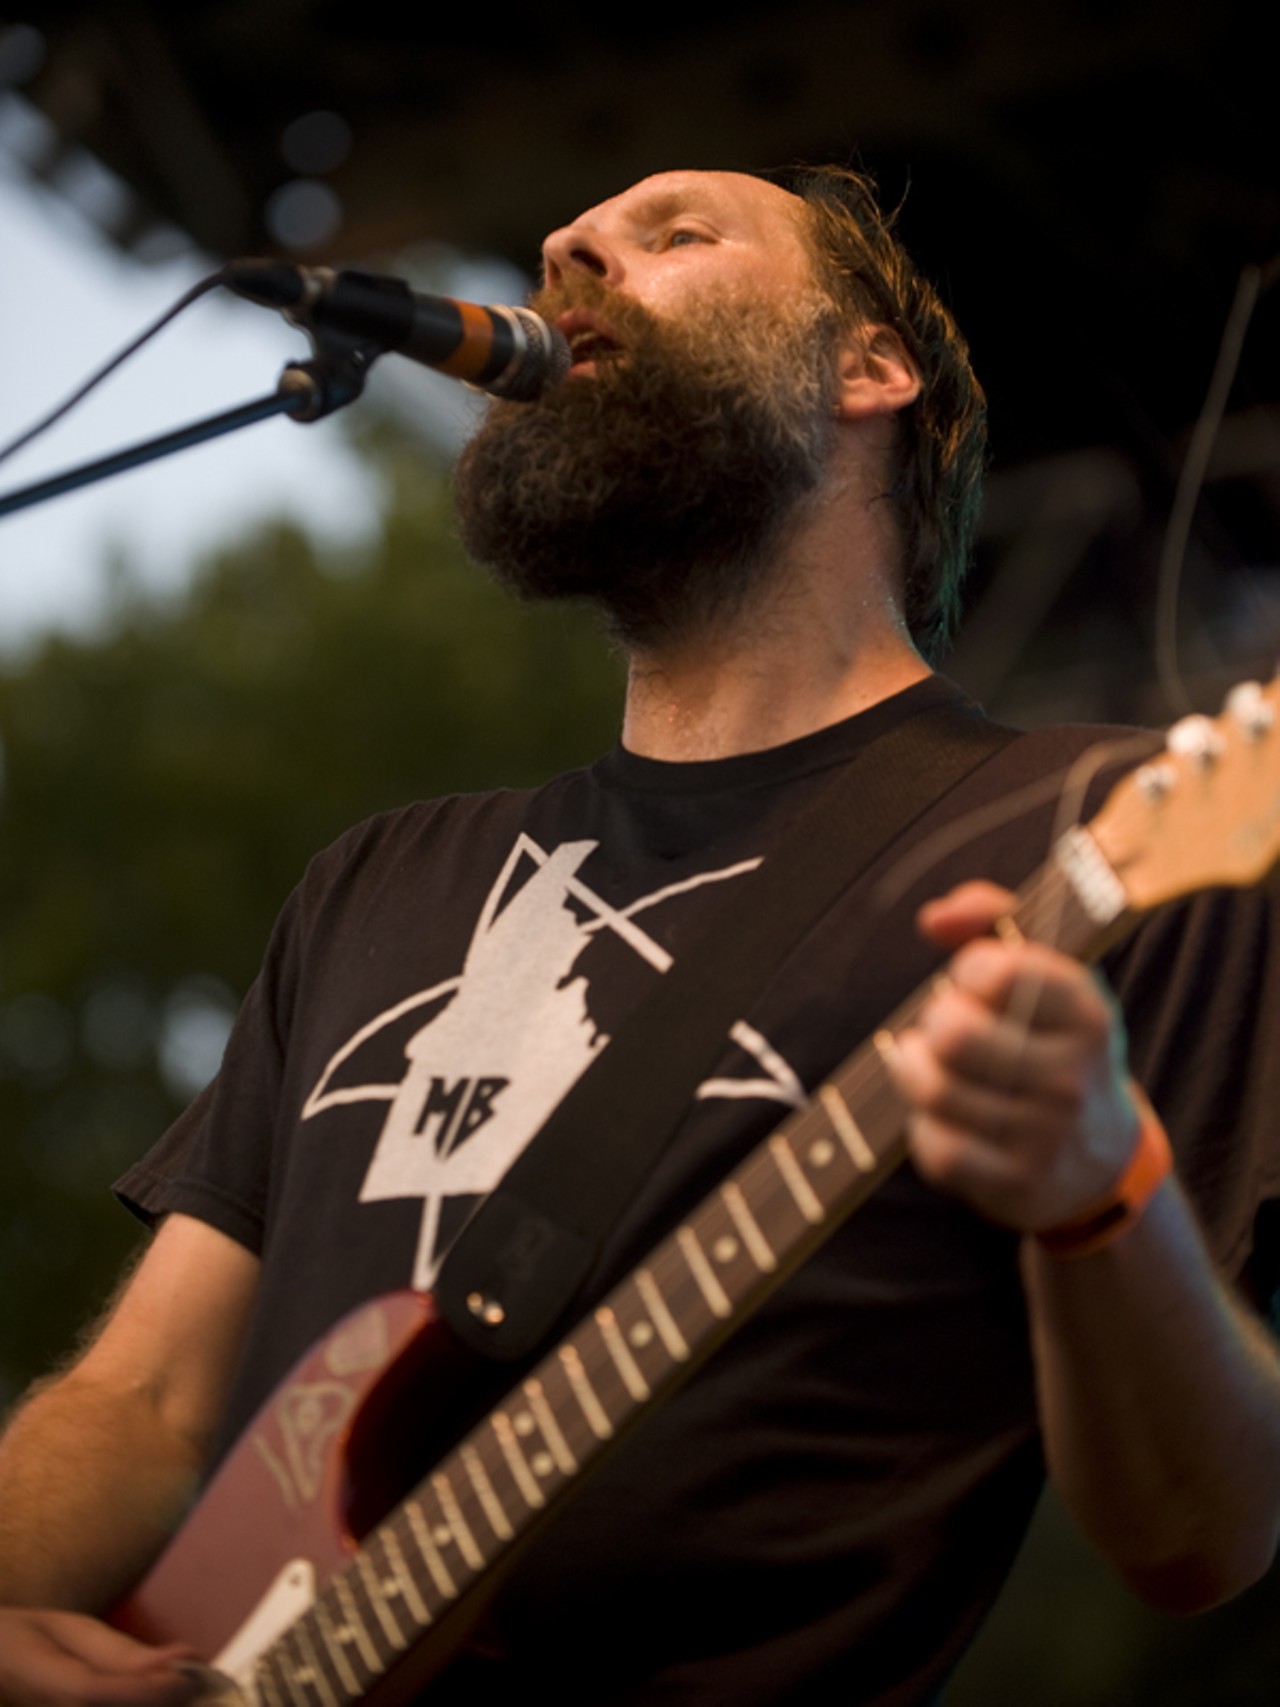 Built to Spill performing at Loufest.